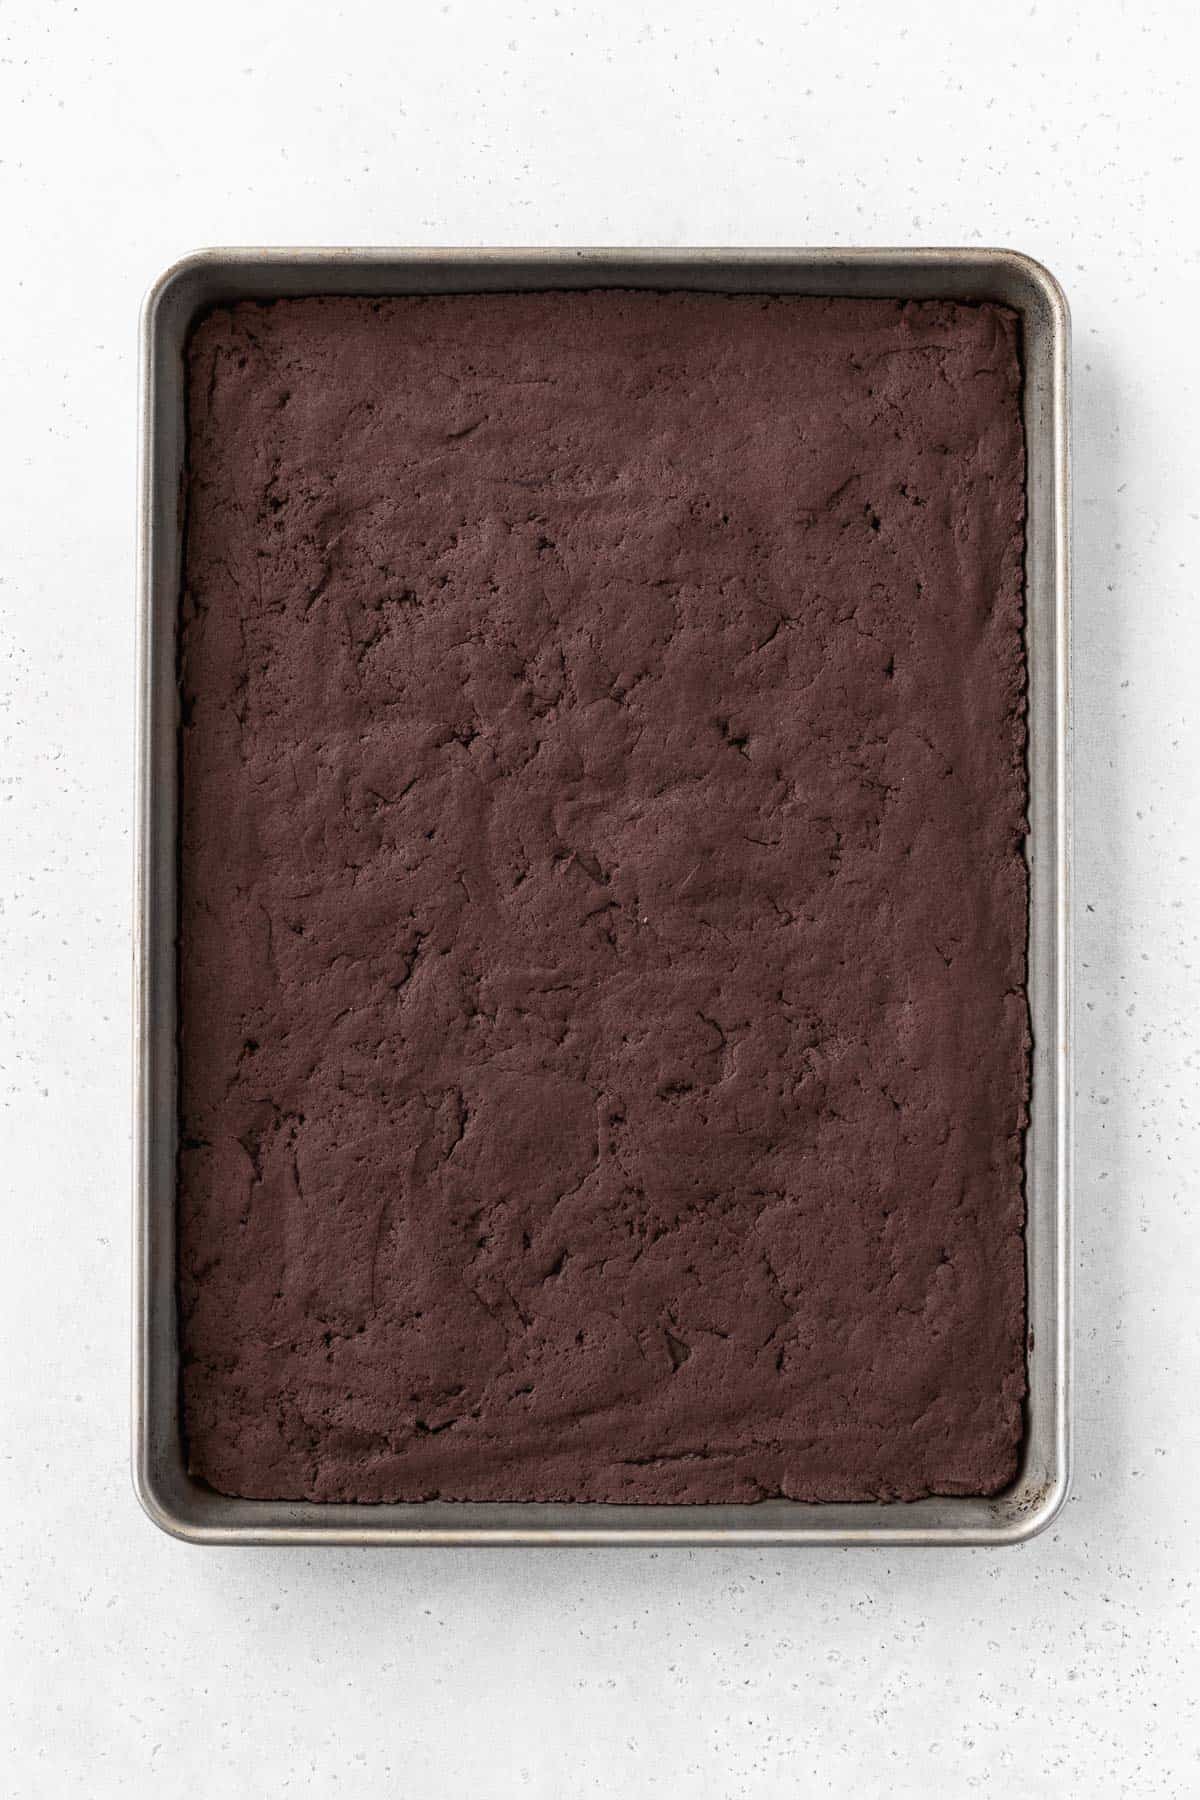 Baked chocolate ice cream sandwich cooking on a baking sheet.